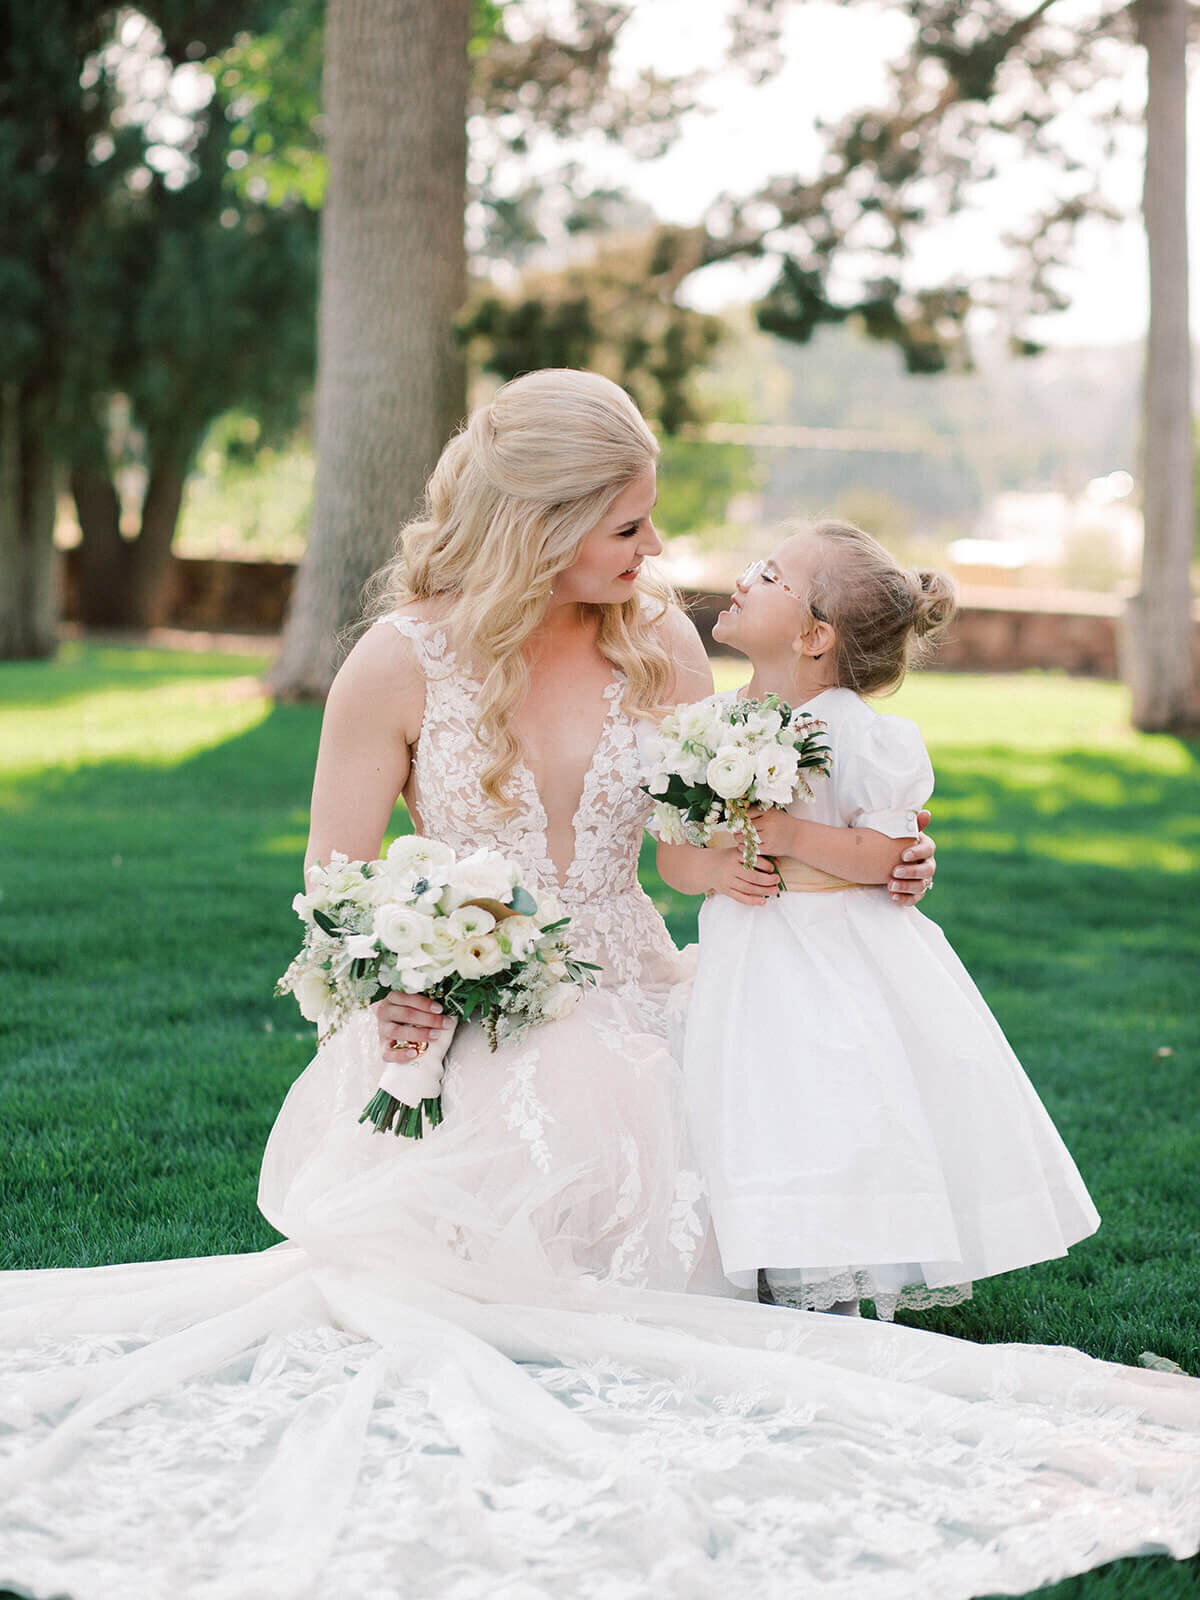 Bride with flower girl and custom floral arrangements